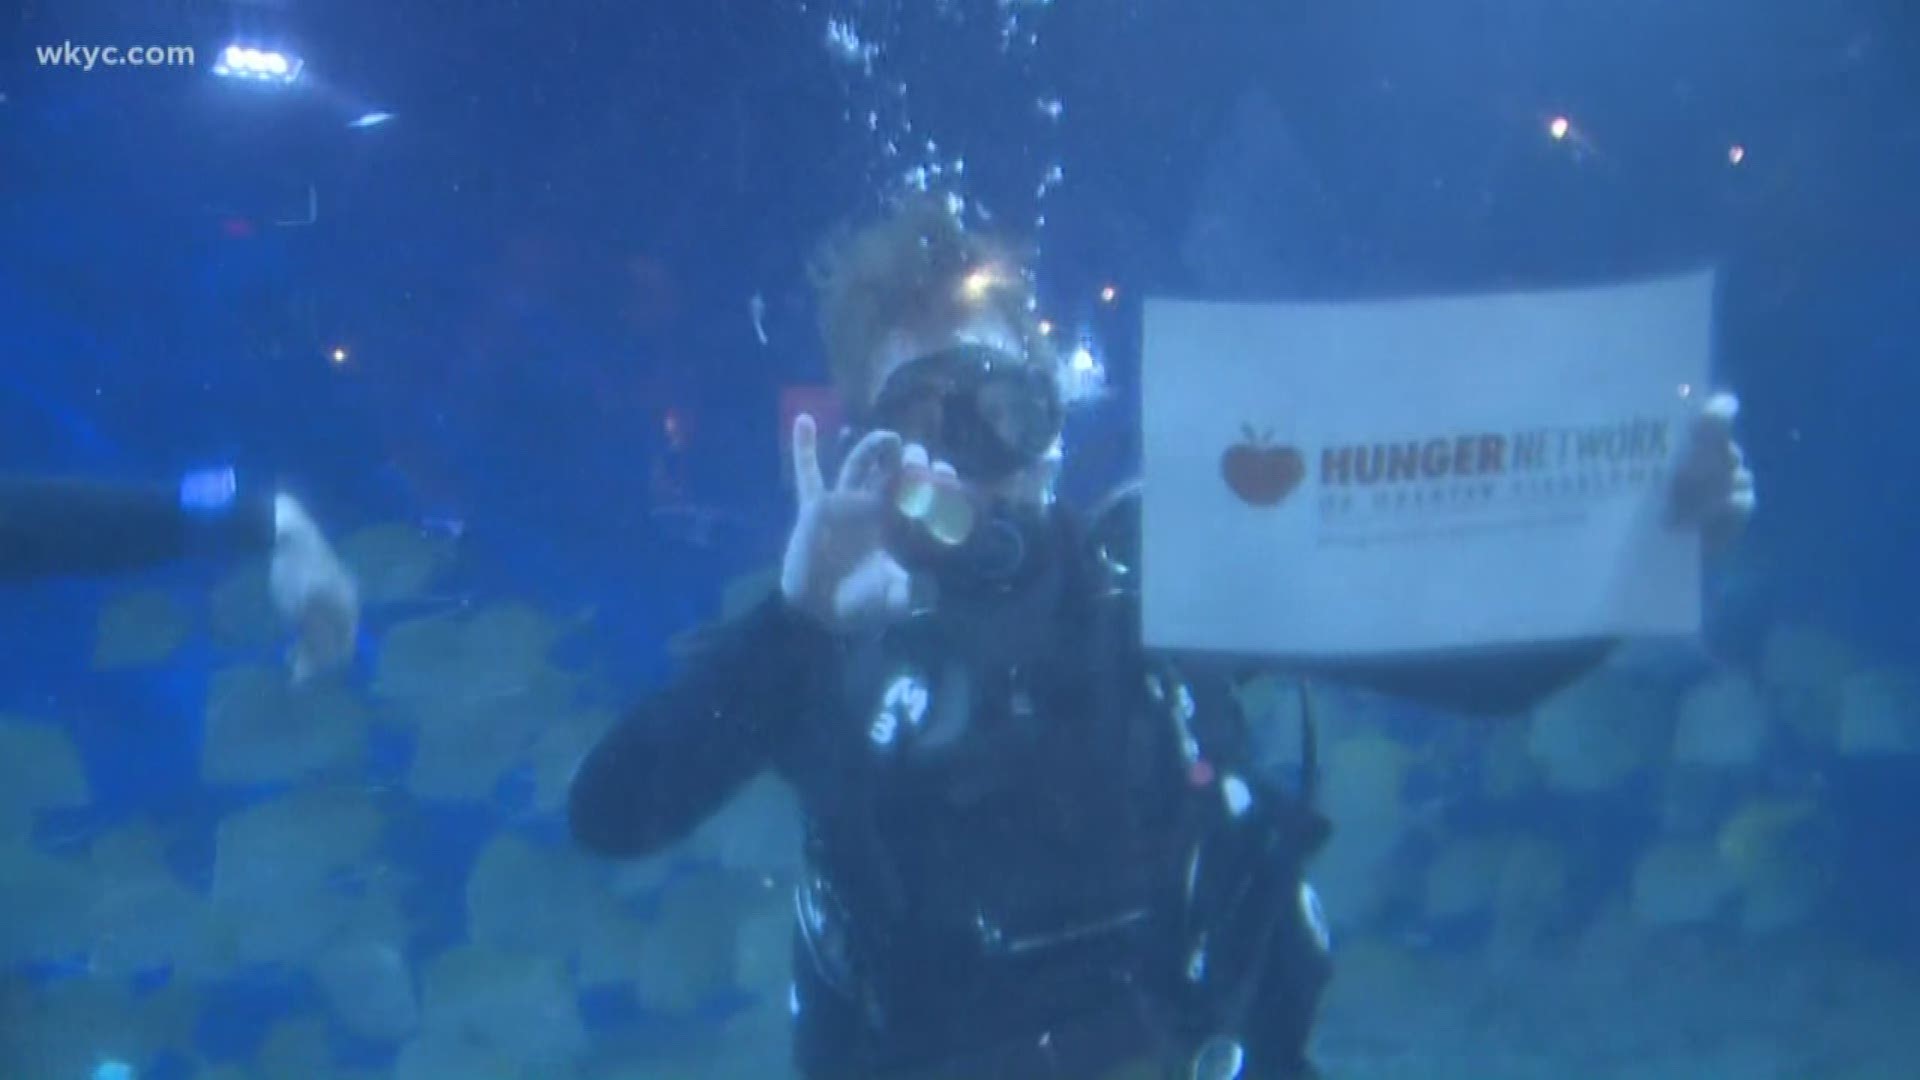 Greater Cleveland Aquarium: Touchdown for Hunger